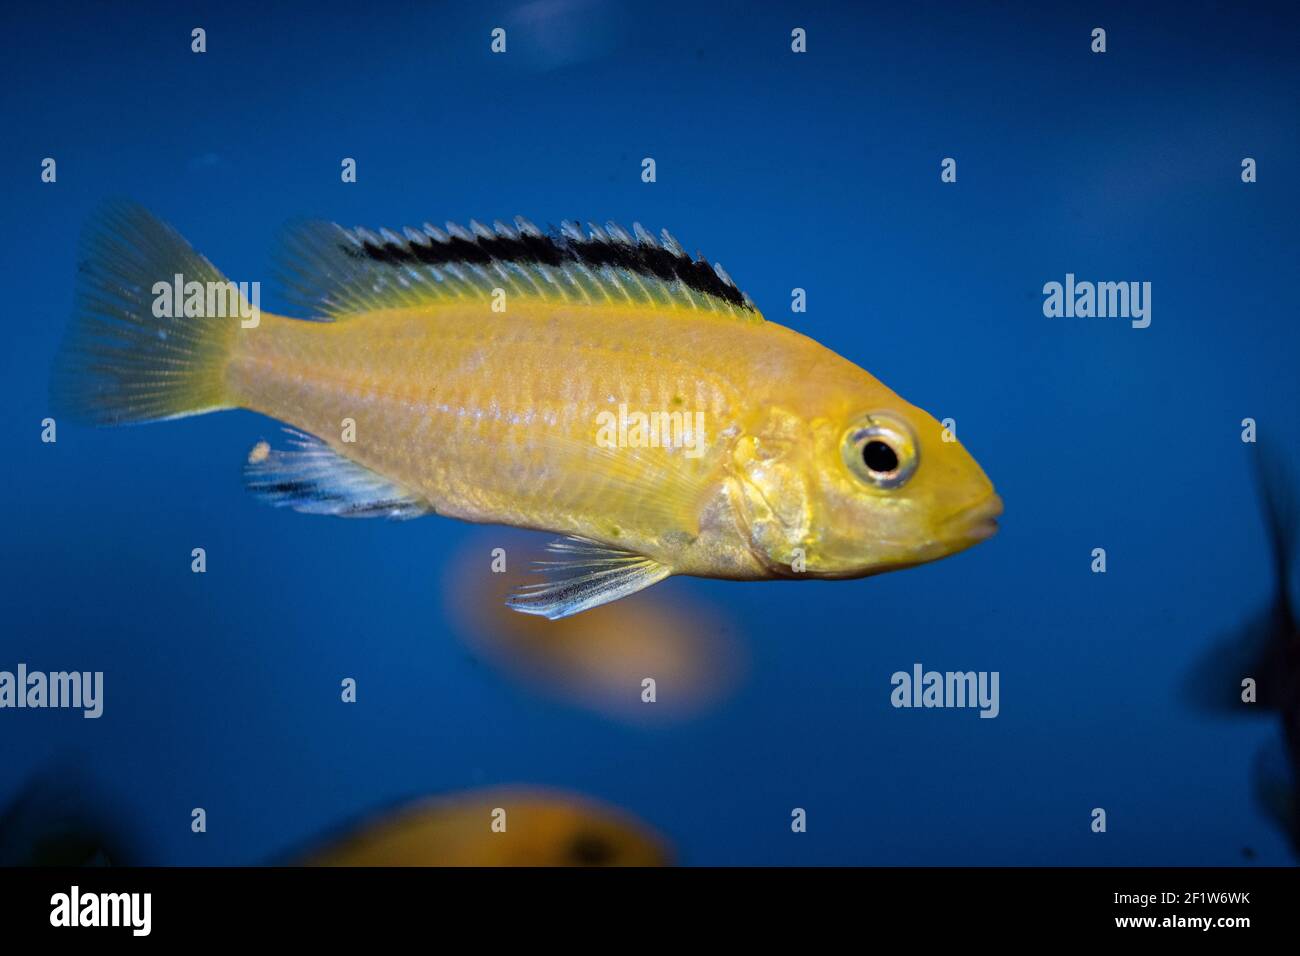 Labidochromis caeruleus is a cichlid from Lake Malawi in East Africa.   It is also known as lemon yellow lab, the blue streak hap, the electric yellow Stock Photo